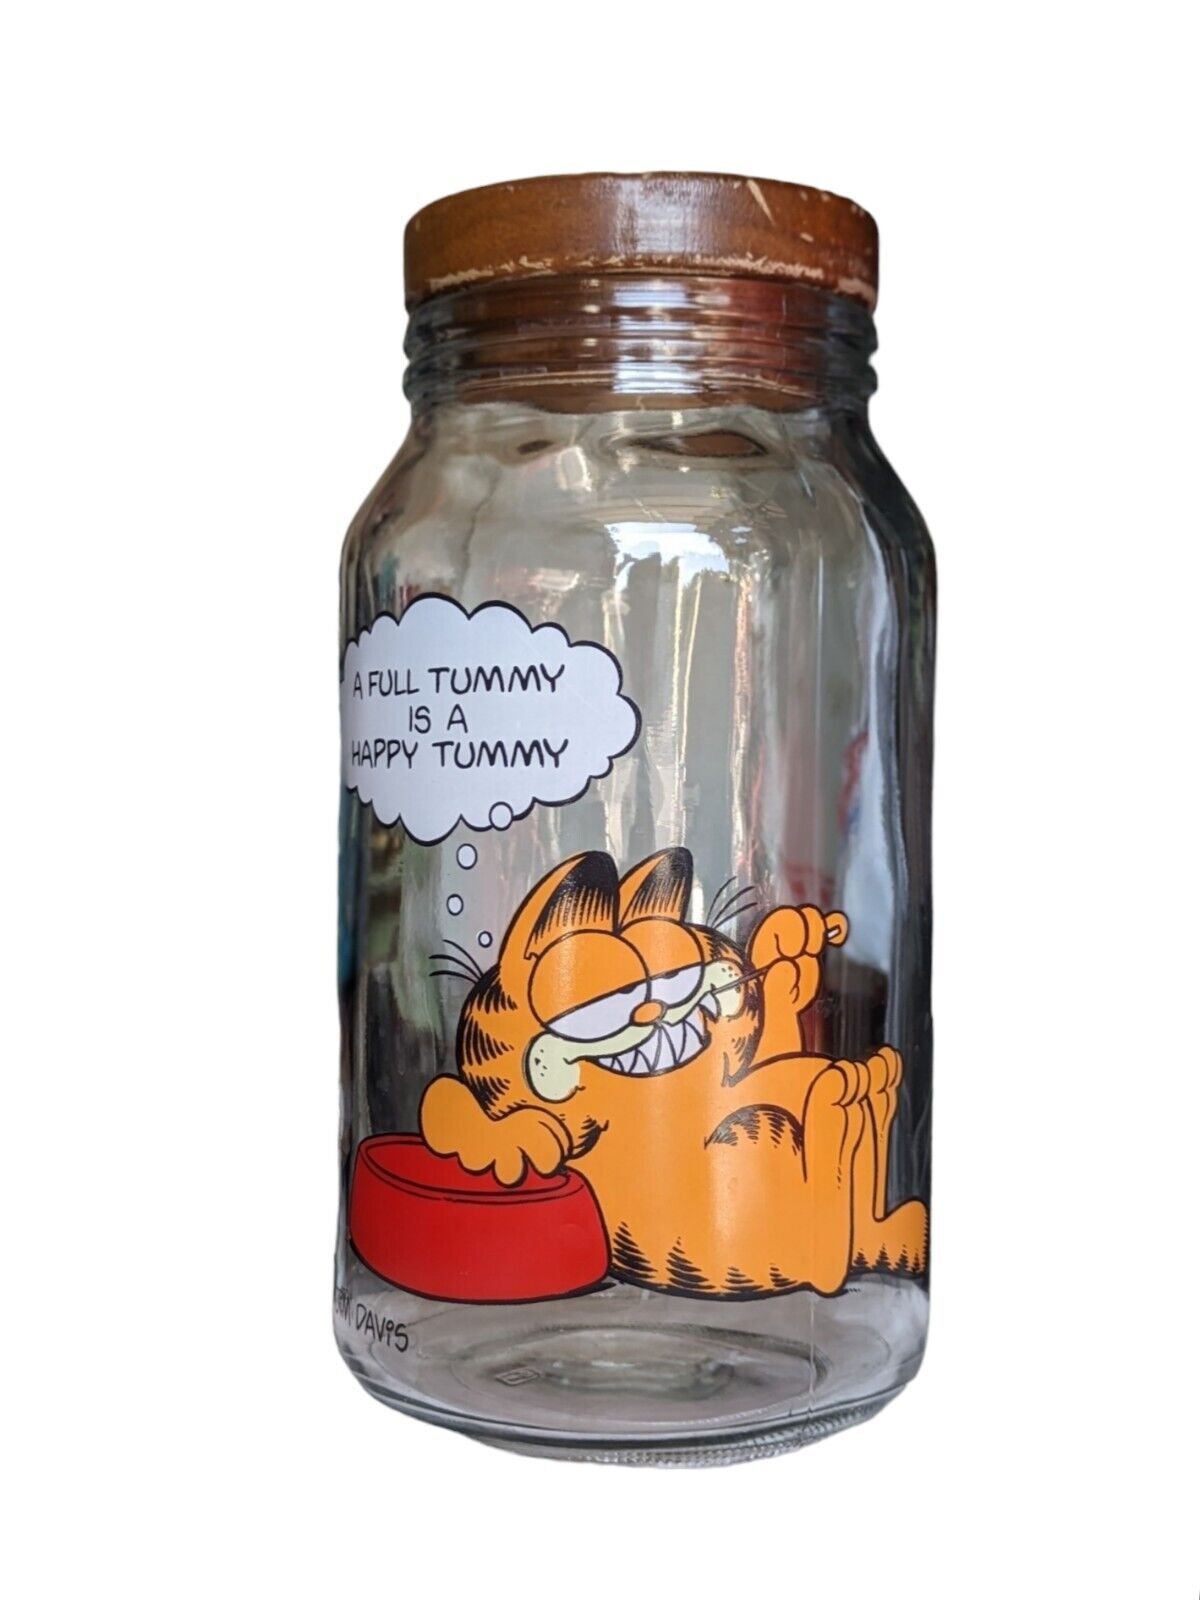 1978 Garfield Anchor Hocking Glass Canister with Lid Full Tummy Happy Tummy